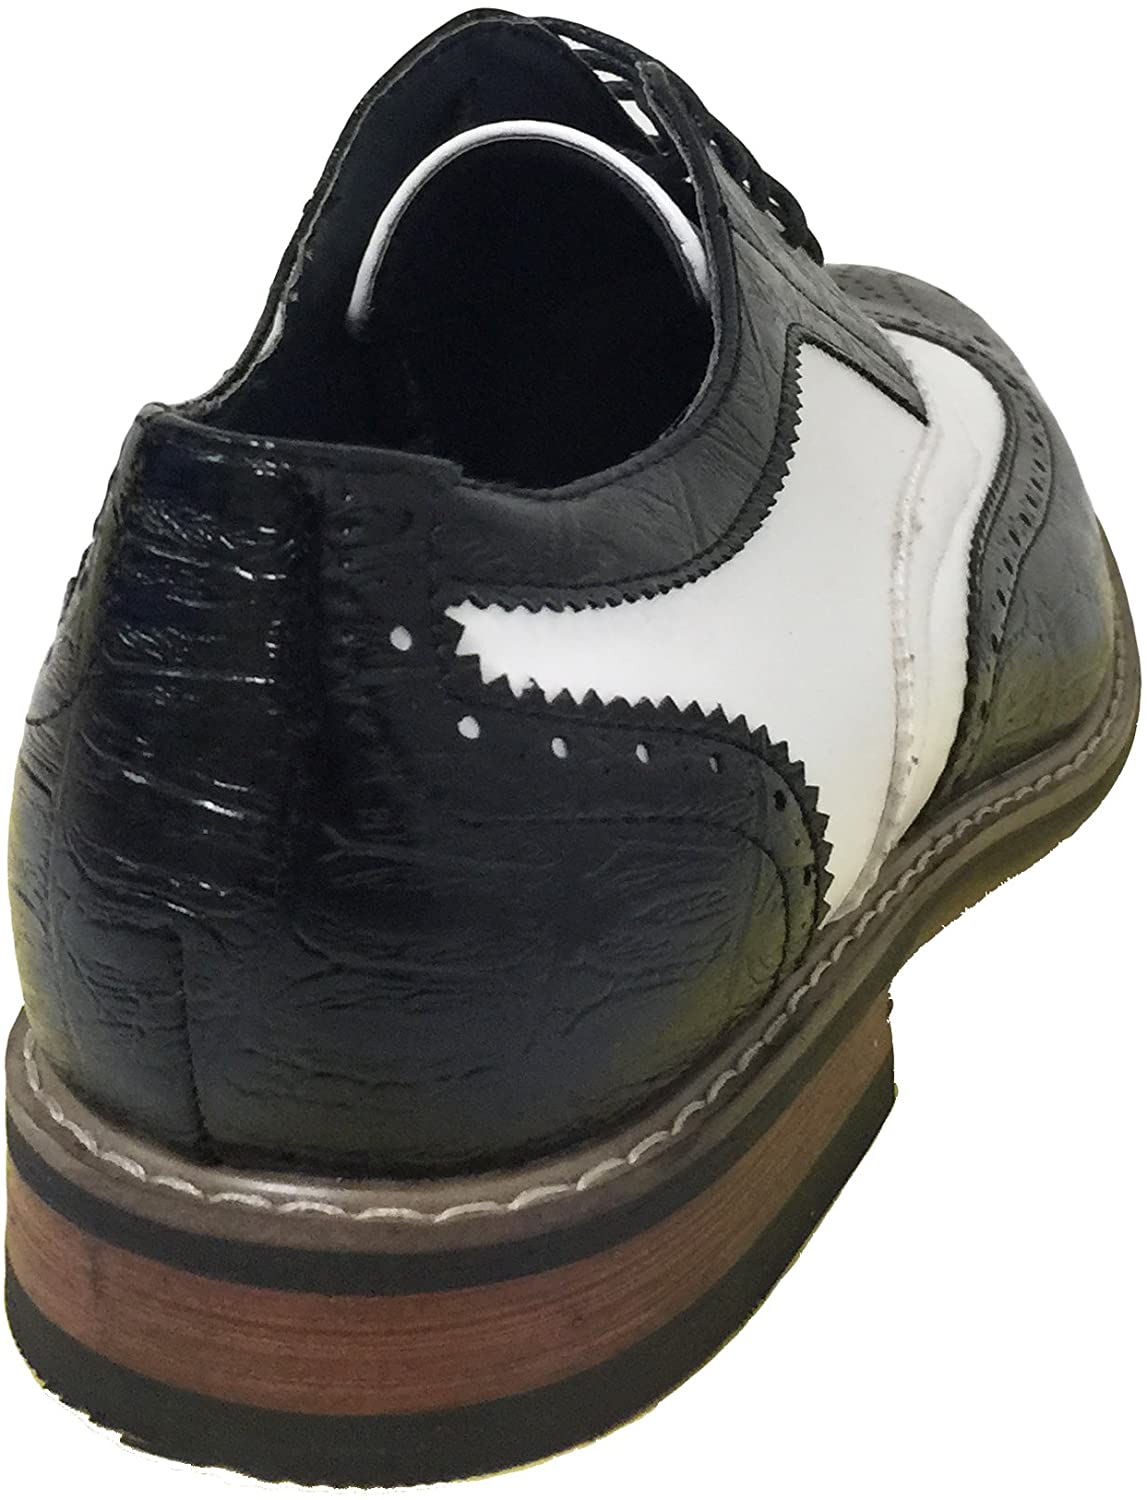 Men's Dress Shoes Wingtip Lace Up Brogue Oxfords Casual - image 5 of 5